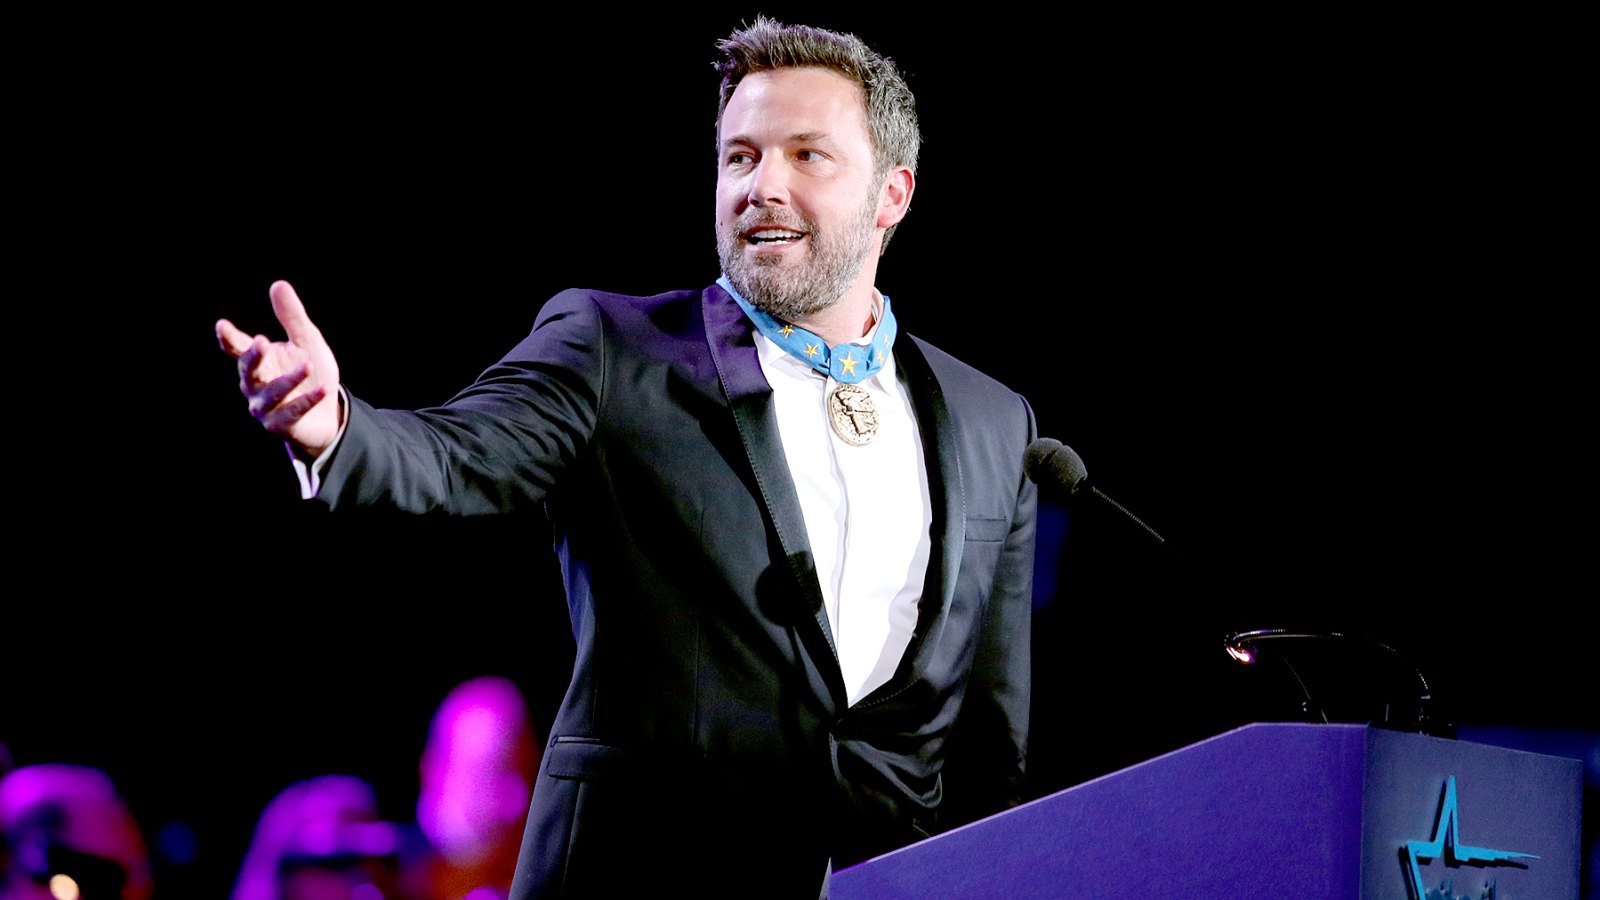 Ben Affleck speaks on stage at the 2017 Starkey Hearing Foundation So the World May Hear Awards Gala at the Saint Paul RiverCentre on July 16, 2017 in St. Paul, Minnesota.